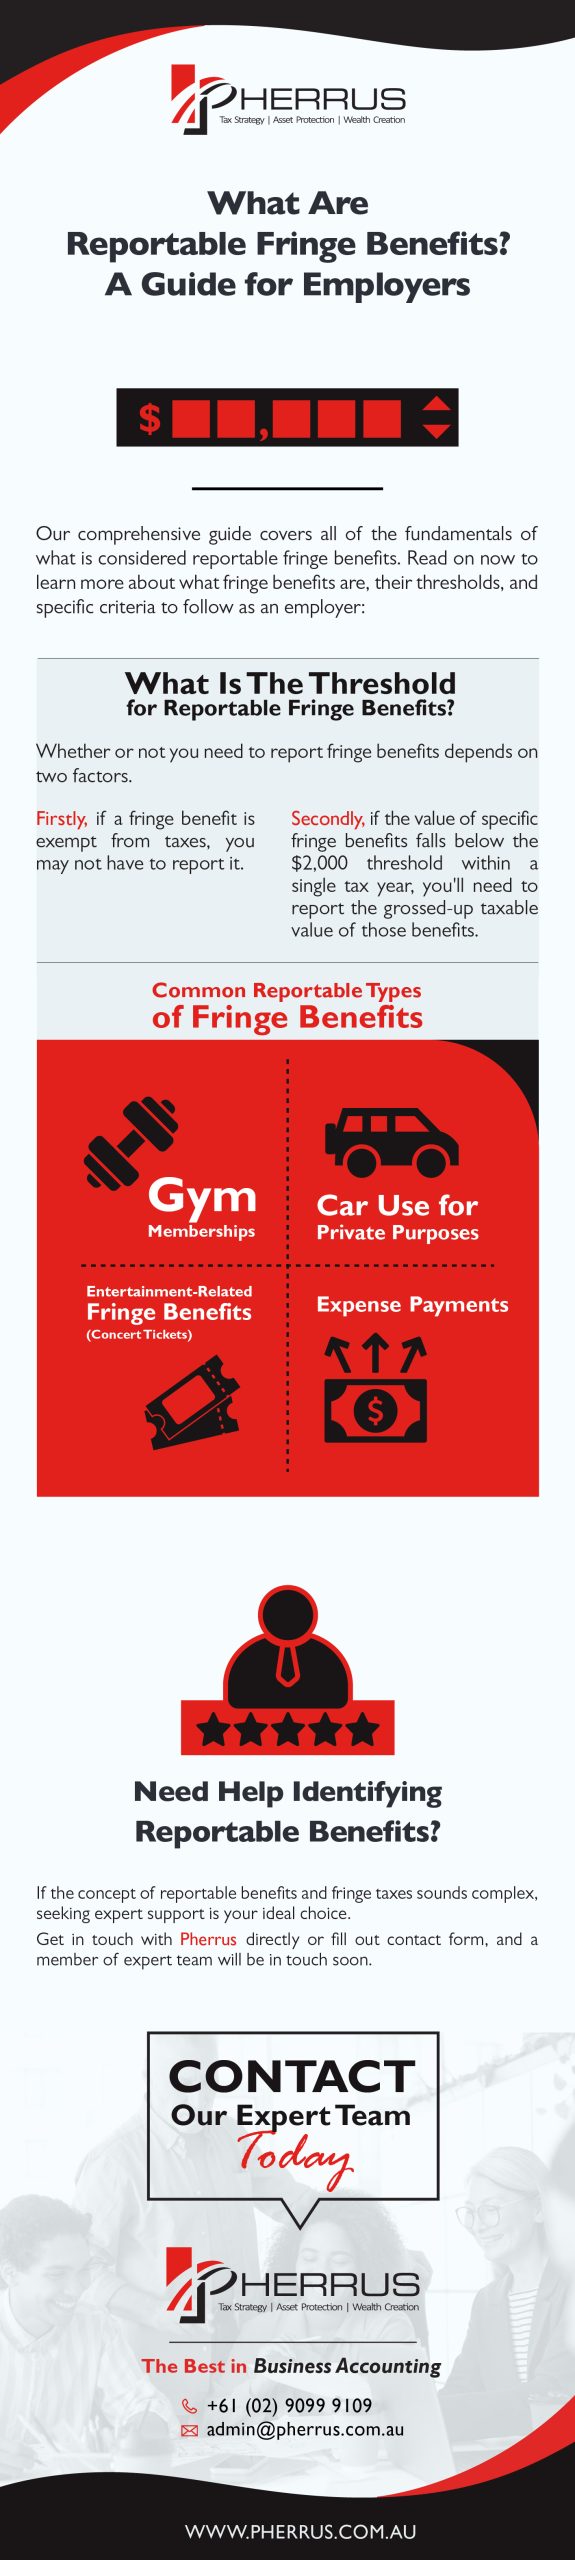 What Are Reportable Fringe Benefits - A Guide for Employers Infographic